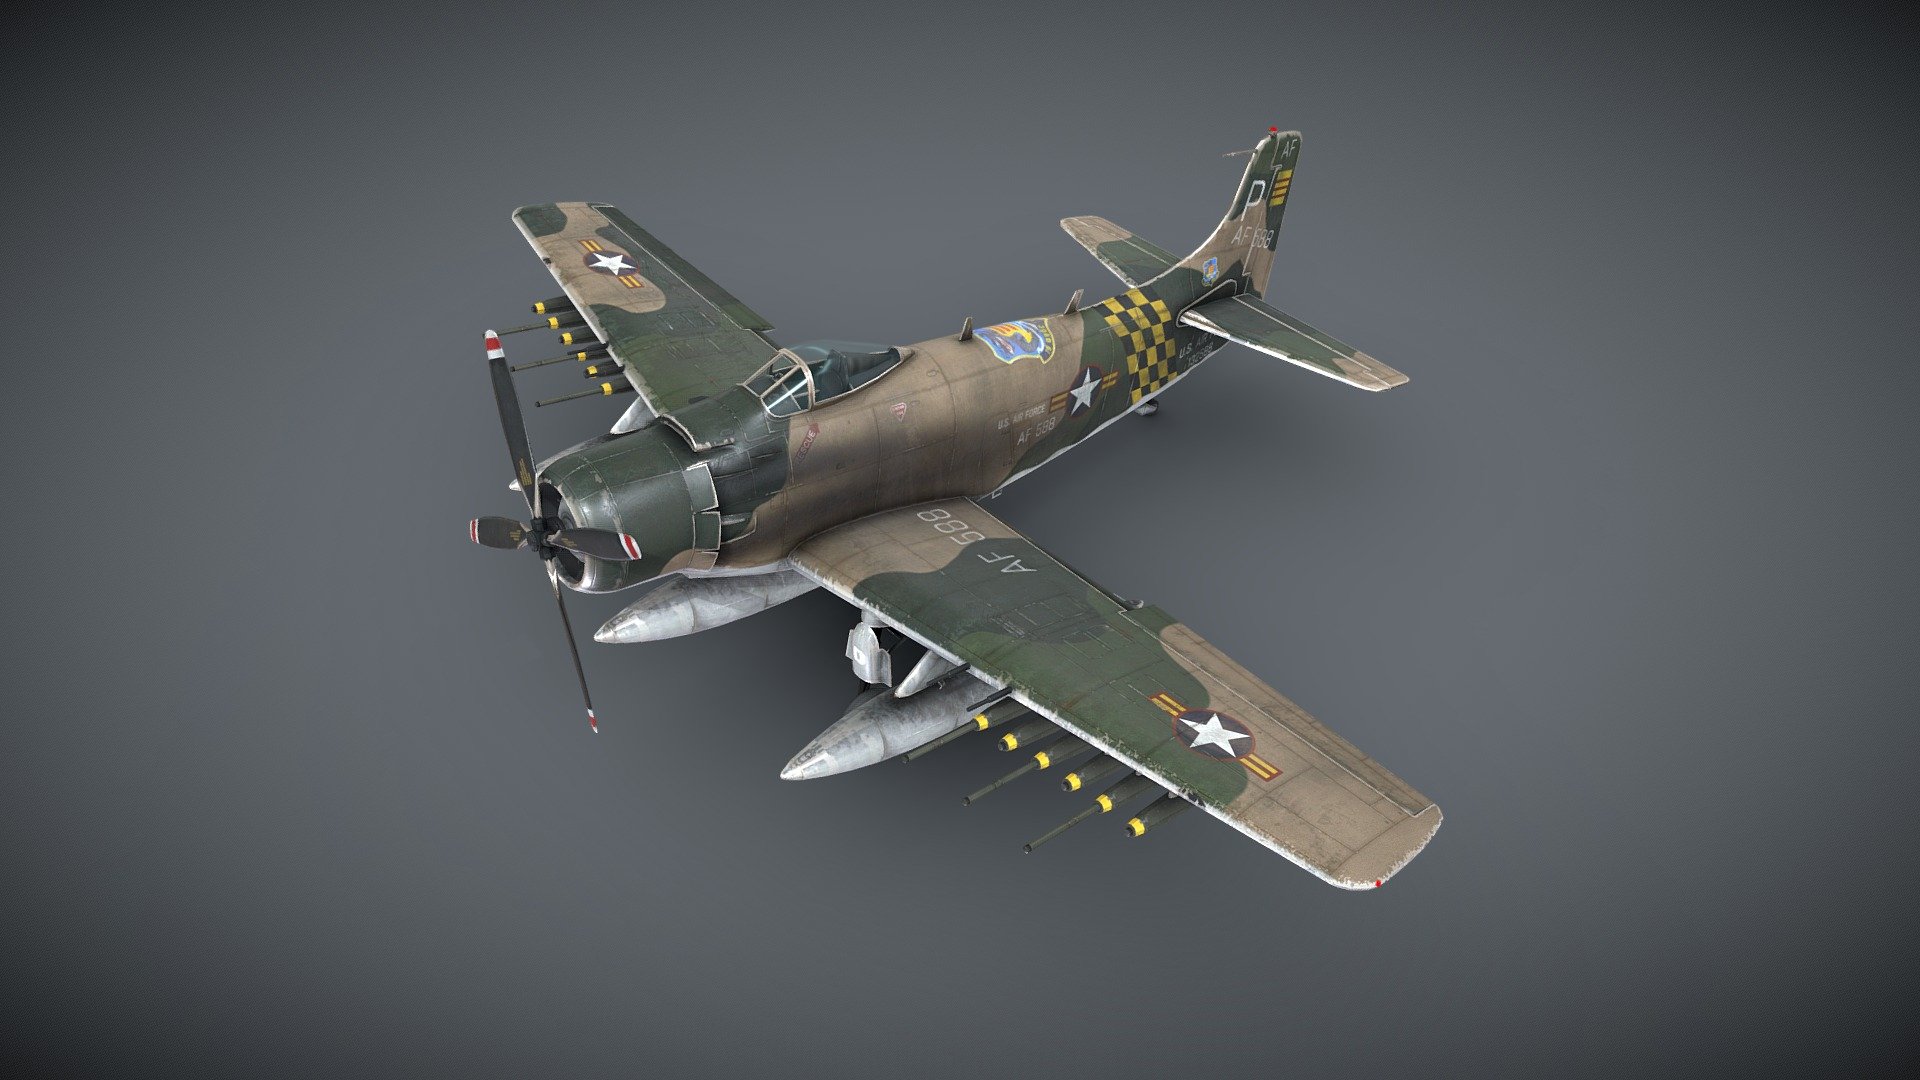 Douglas A-1 Skyraider (514th squadron)




Created in 3ds MAX 2018 no plugins used.

Low-poly (13959 Tris) ready to use in Games, AR/VR

Textures are in PNG format 4096x4096 PBR metalness 1 set .

Available formats:MAX 2018 and 2015, OBJ, MTL, FBX, .tbscene.

Files unit: Centimeters

If you need any other file format you can always request it.

All formats include materials and textures.
 - Douglas A-1 Skyraider - Buy Royalty Free 3D model by MaX3Dd 3d model